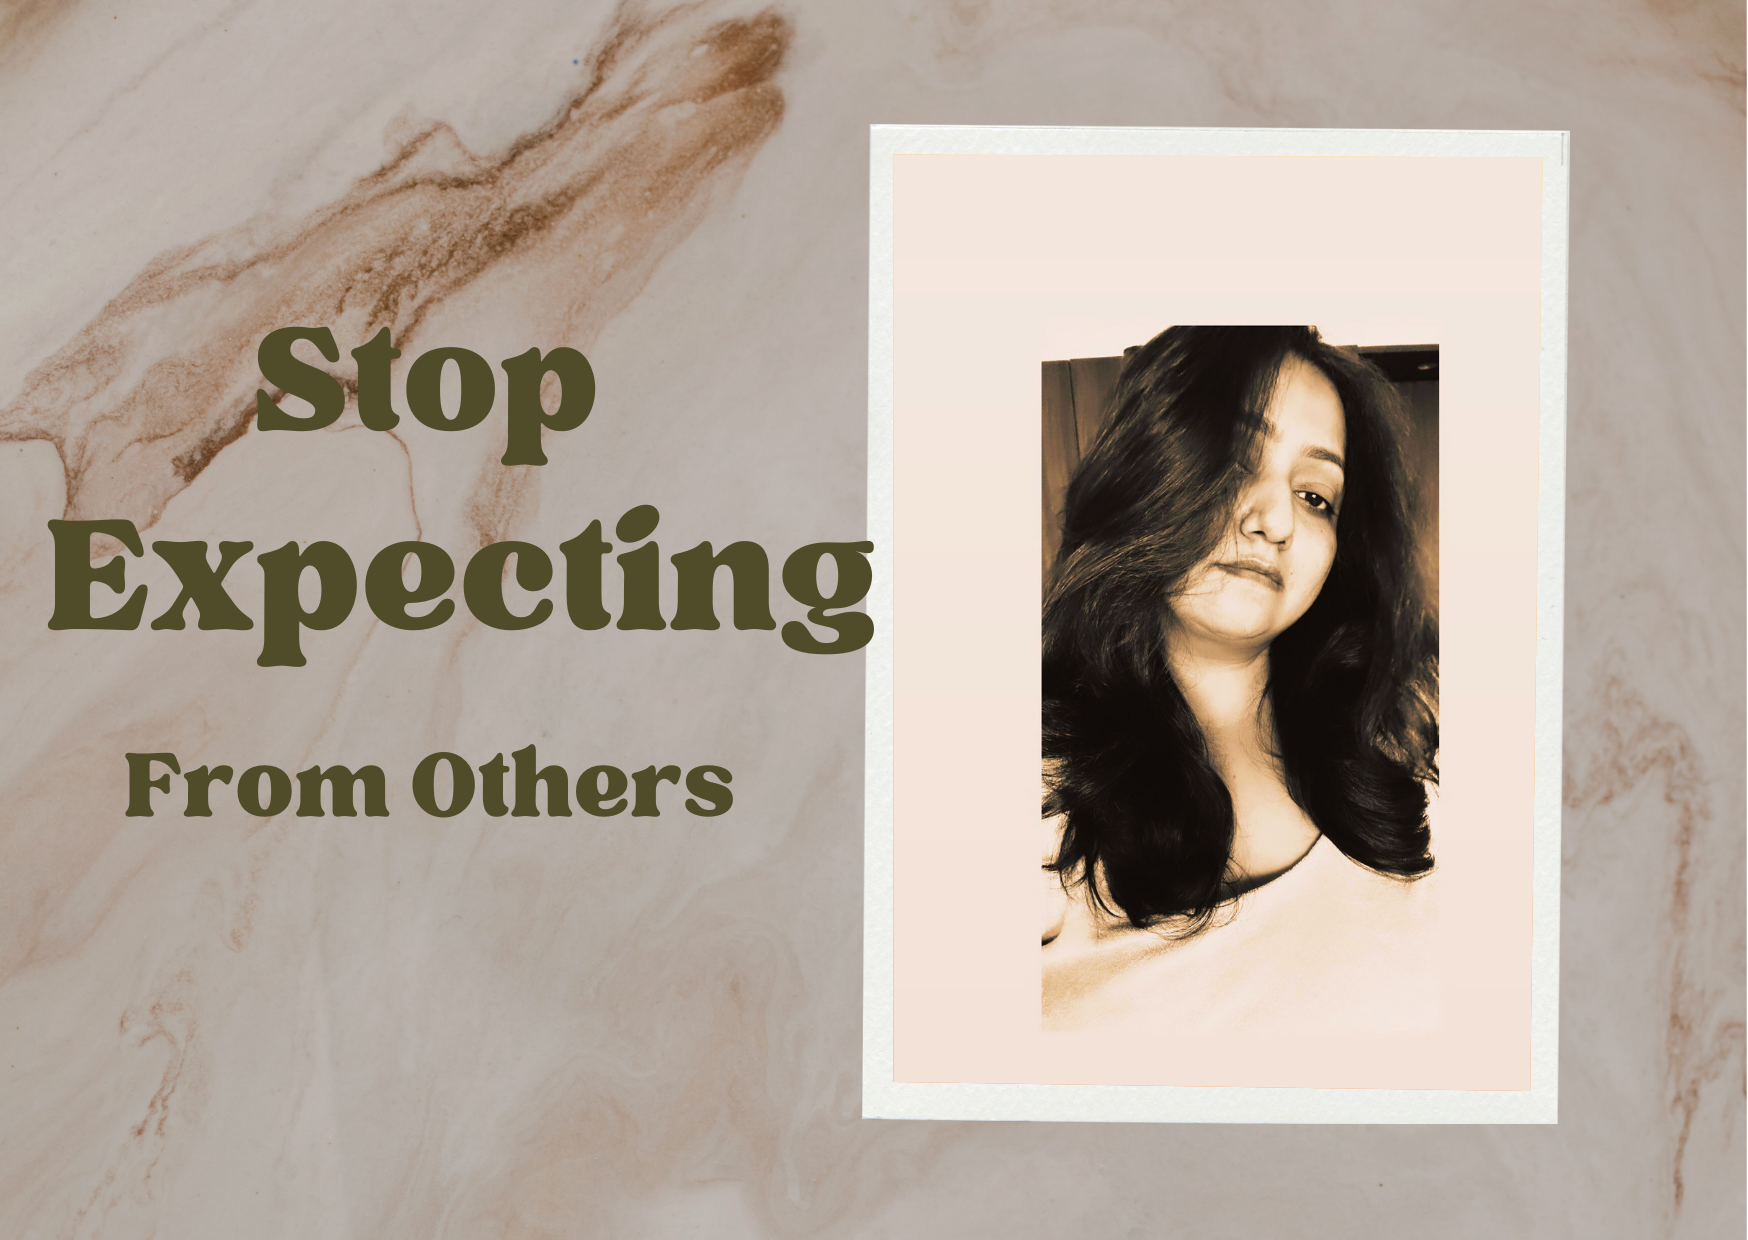 How To Stop Expecting from Others?